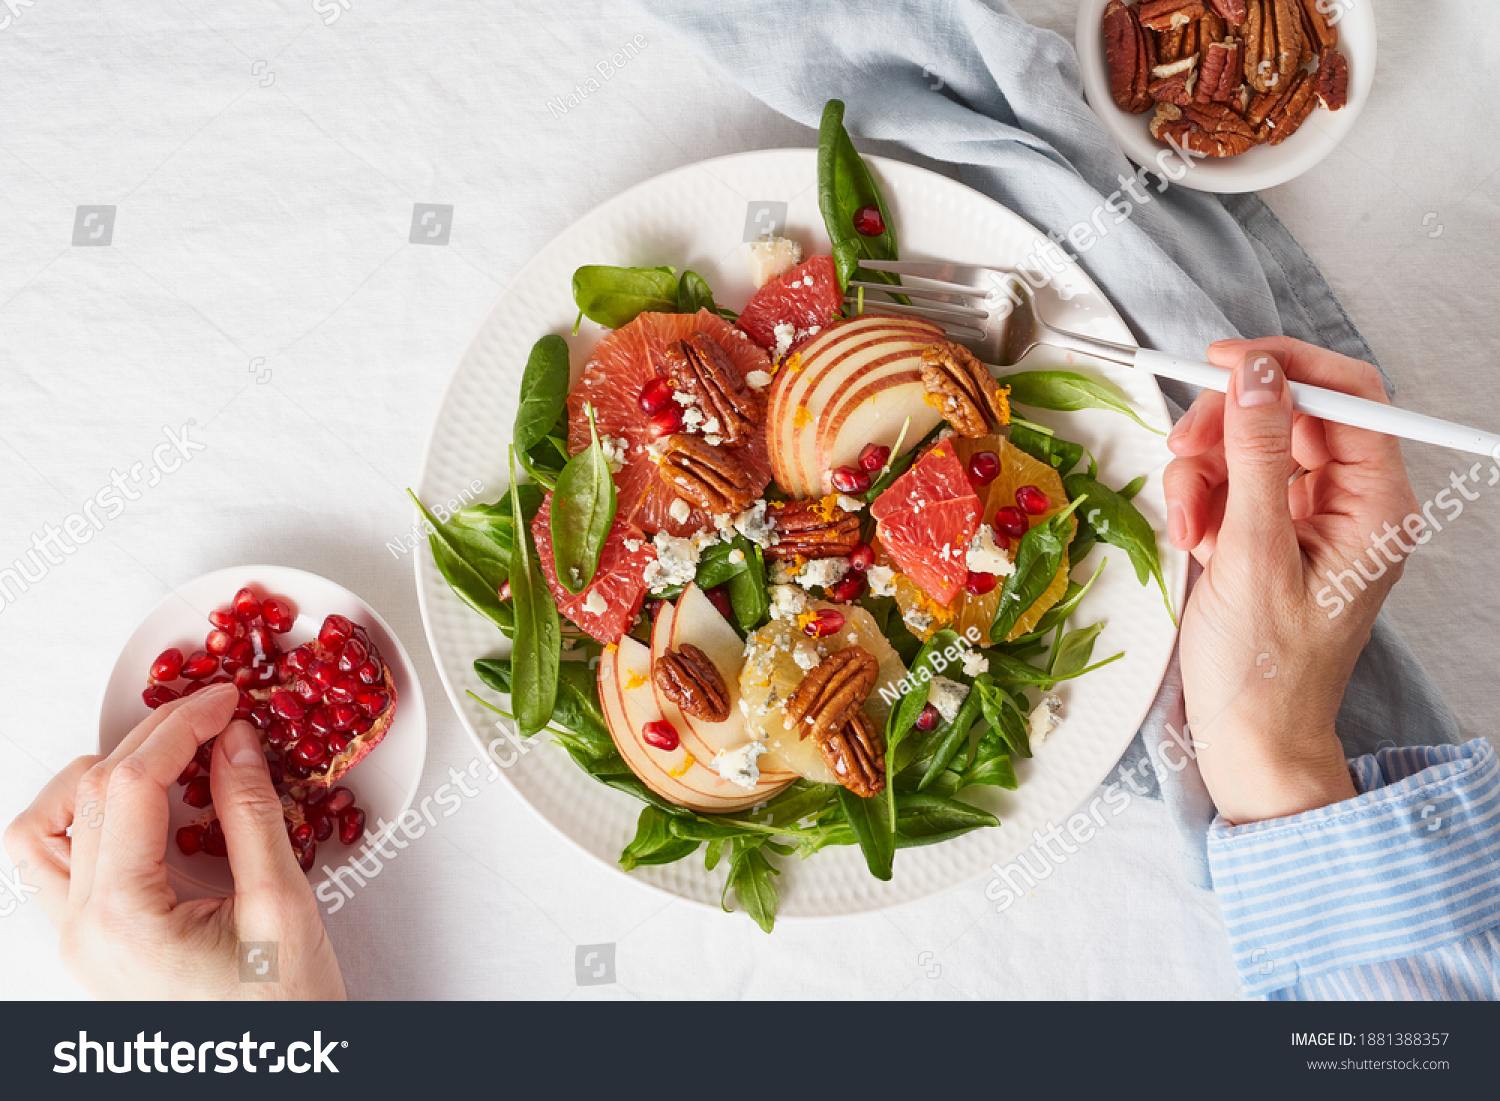 Eating fruits citrus salad with nuts, green lettuce. Balanced food. Top view of woman hands with plate of meal of Spinach with orange, grapefruit, apples, pecans #1881388357